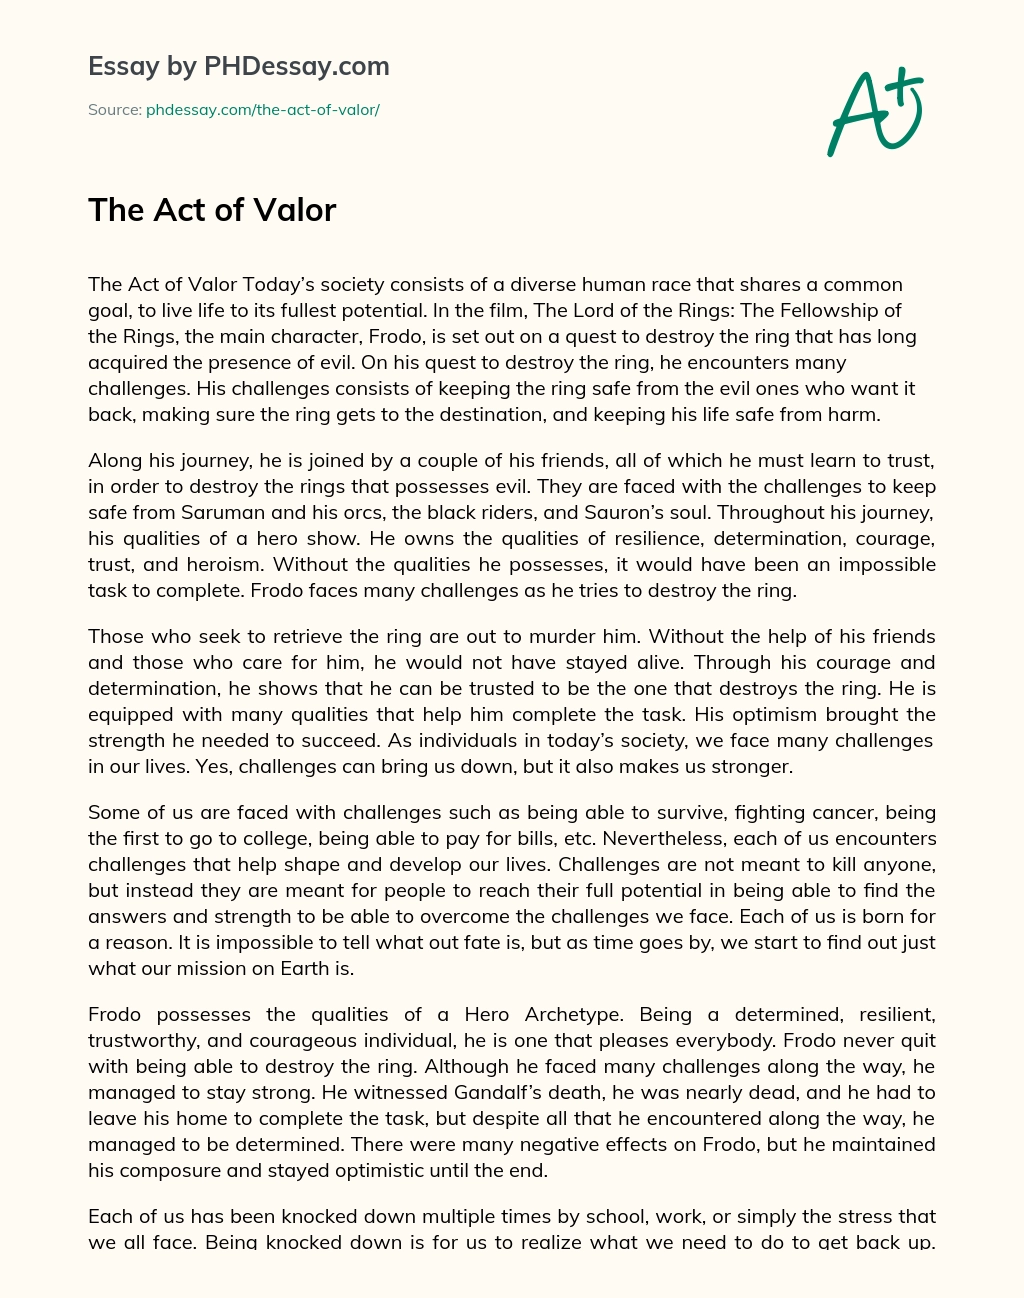 The Act of Valor essay